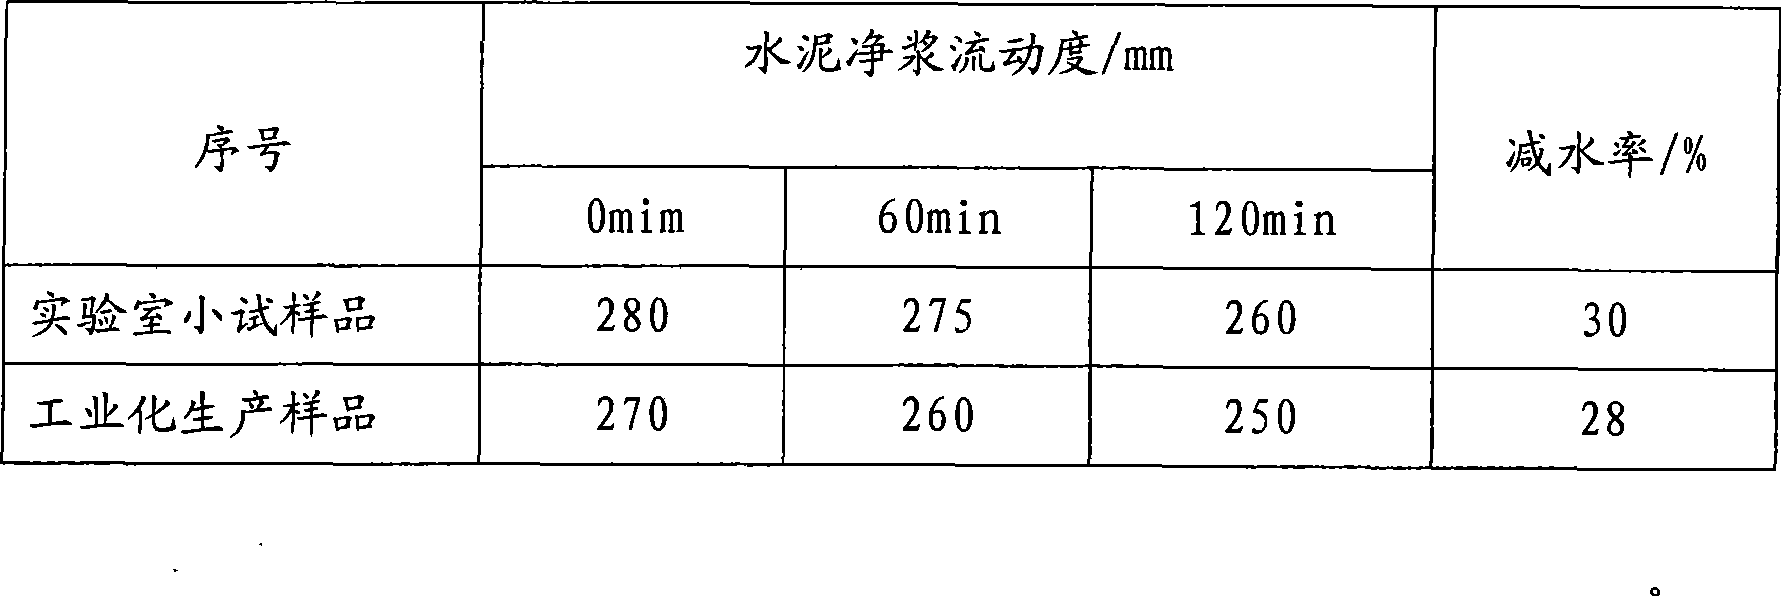 Preparation method of polycarboxylic acids high efficiency water reducer